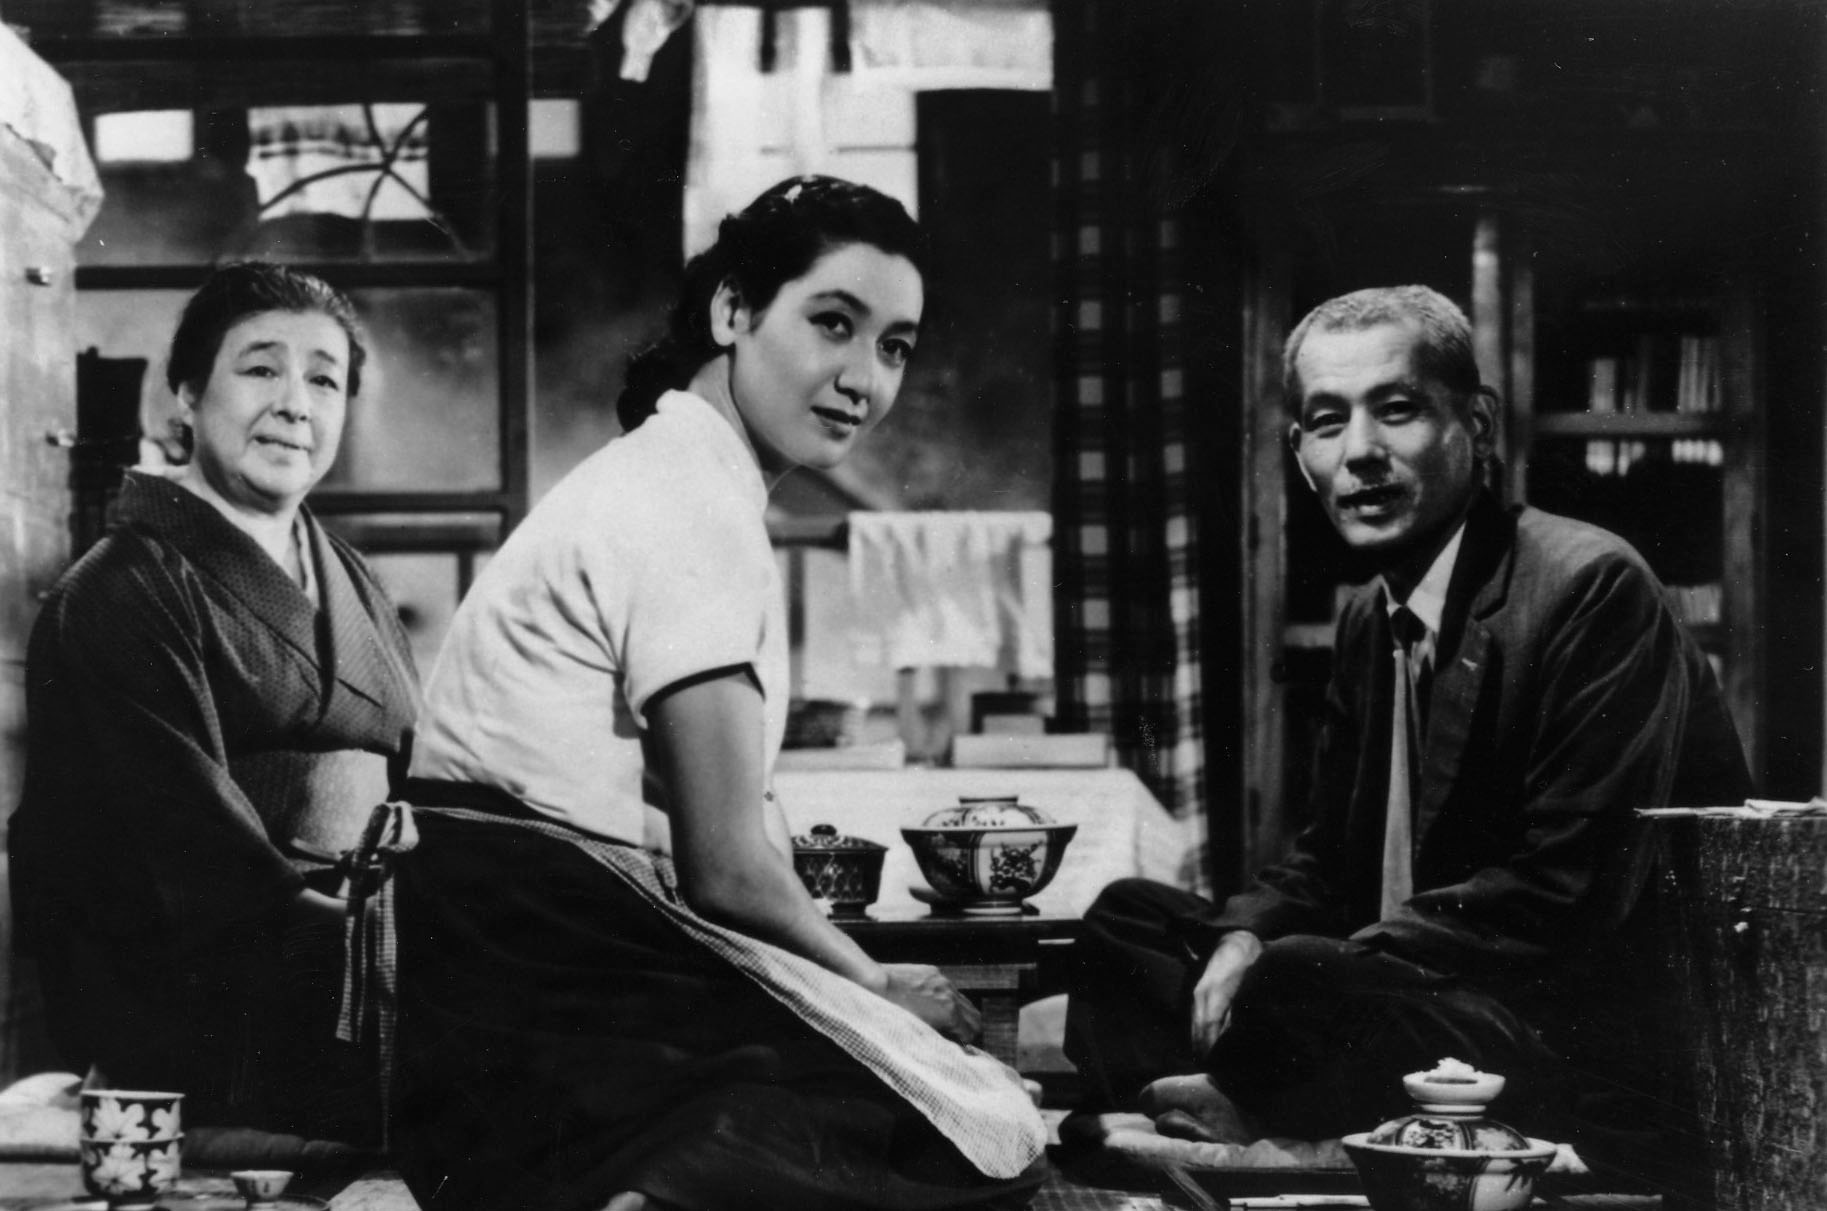 Family ties: Directors have voted Yasujiro Ozu's 1953 movie 'Tokyo Story' the greatest film of all time. | KYODO